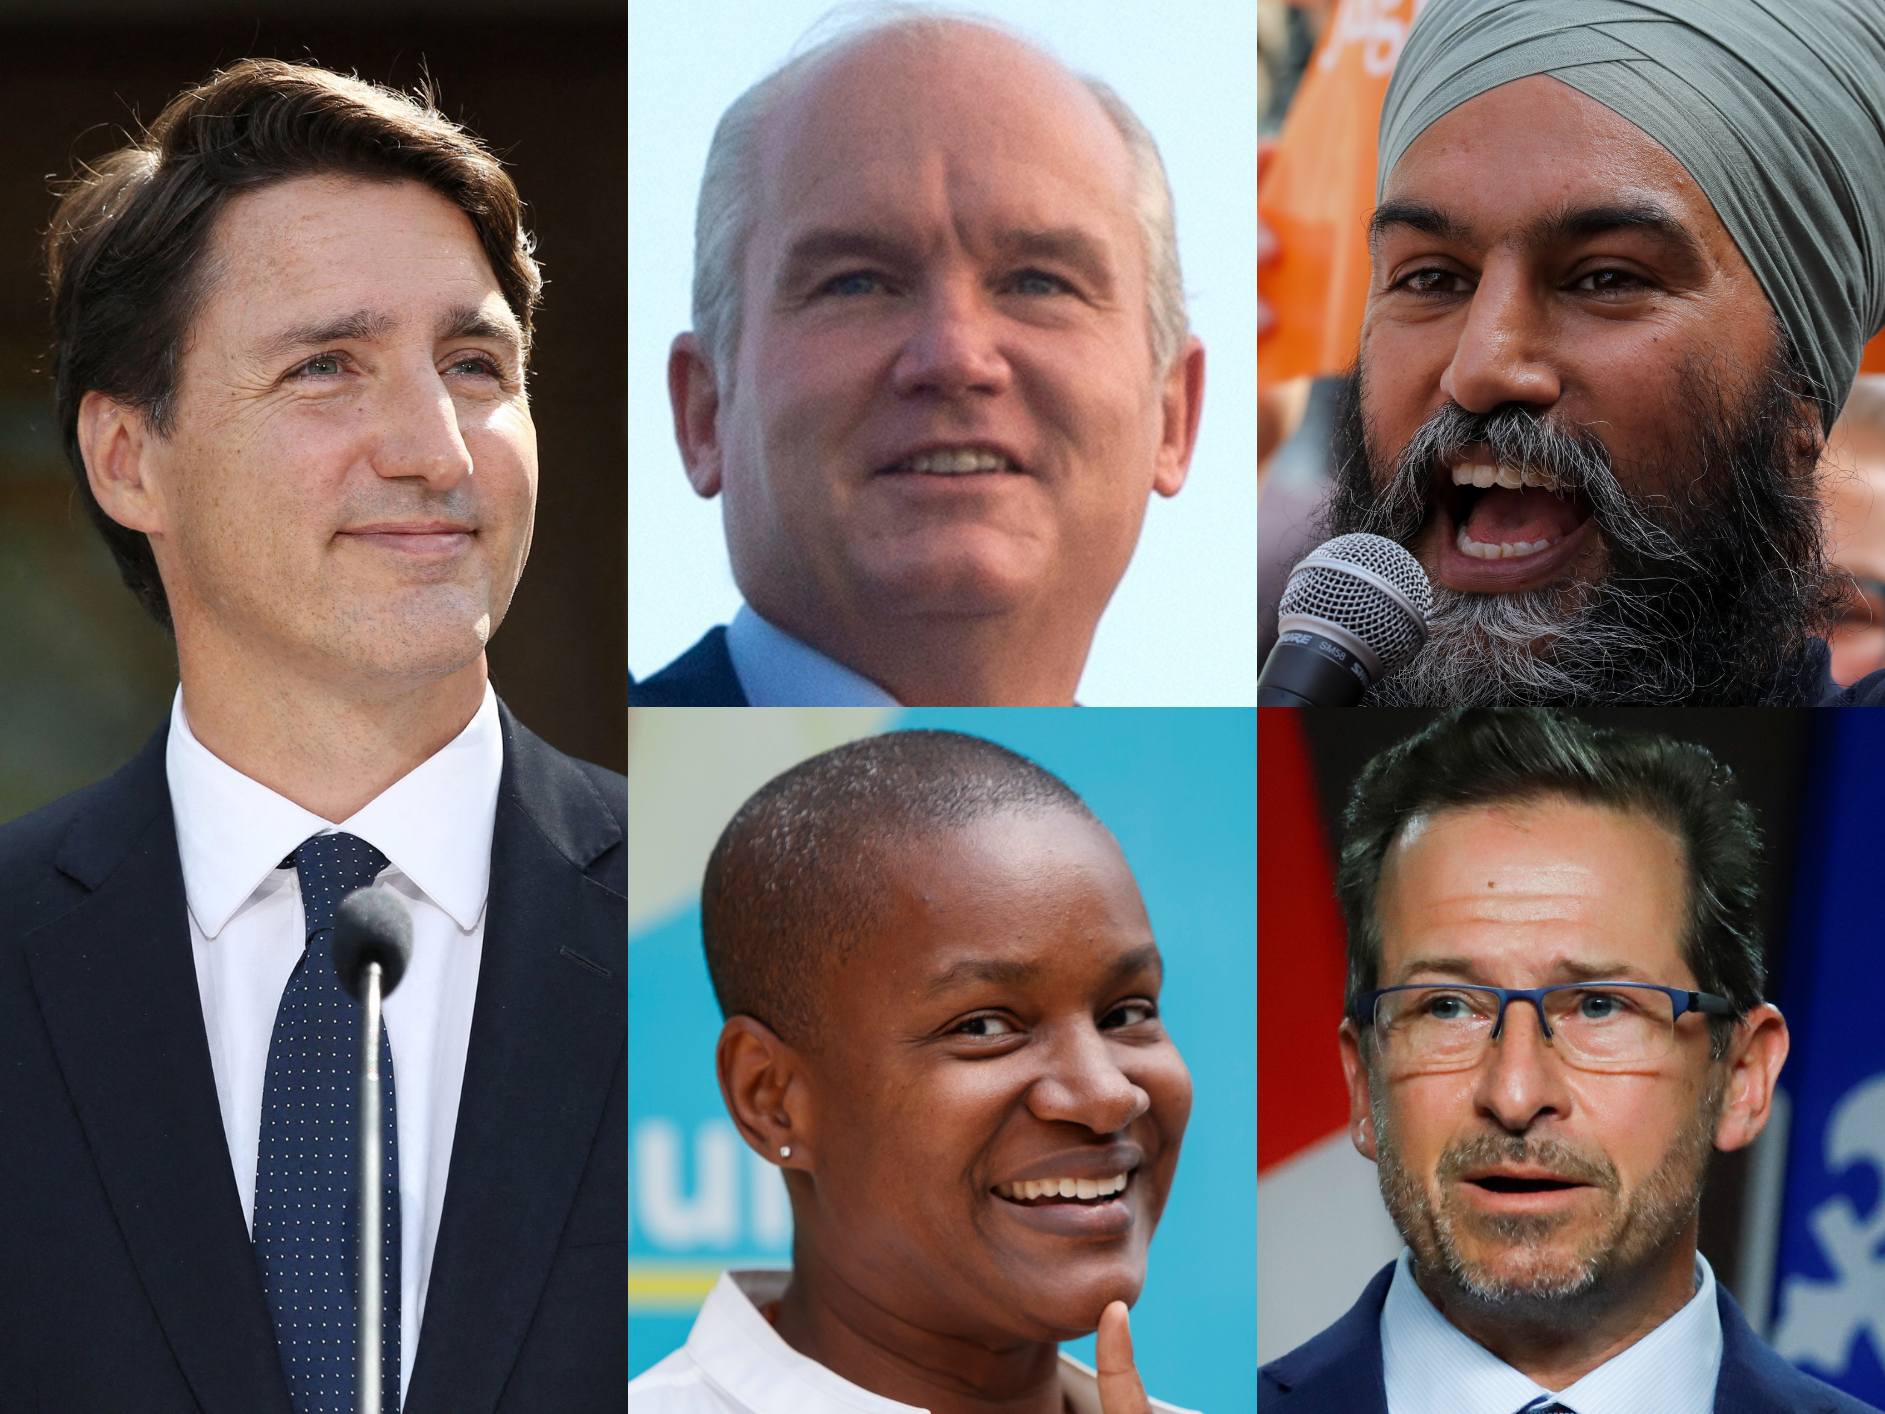 Here's where Canada's federal parties — Liberal leader and Prime Minister Justin Trudeau, Conservative Leader Erin O'Toole, NDP Leader Jagmeet Singh, Bloc Québecois Leader Yves-François Blancet and Green Party leader Annamie Paul — stand on healthcare issues.